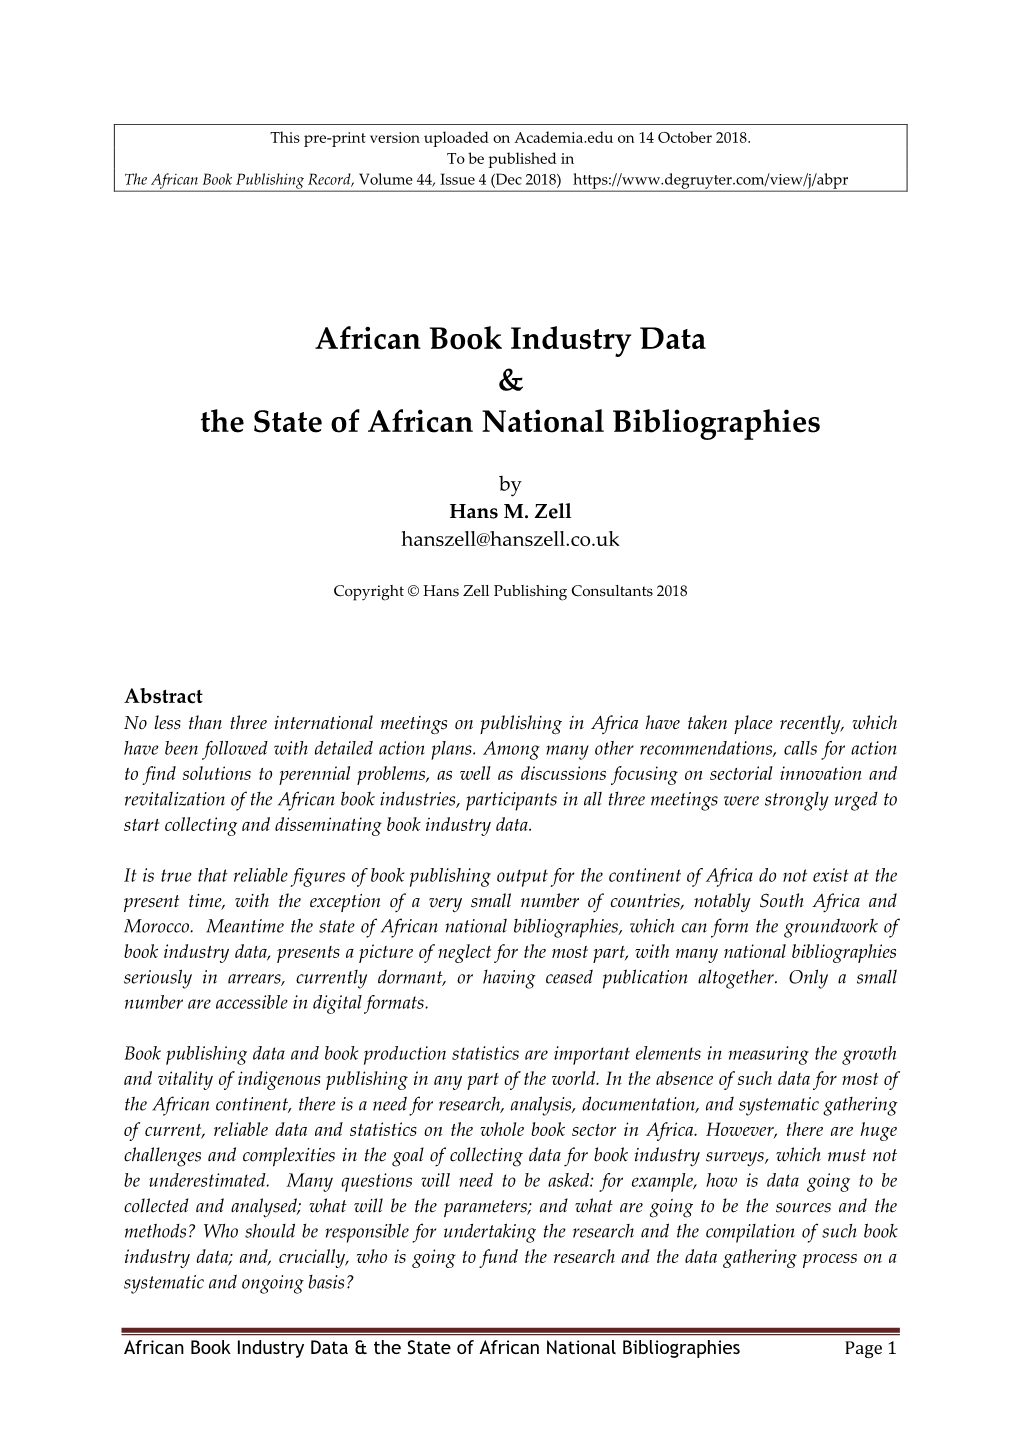 African Book Industry Data & the State of African National Bibliographies